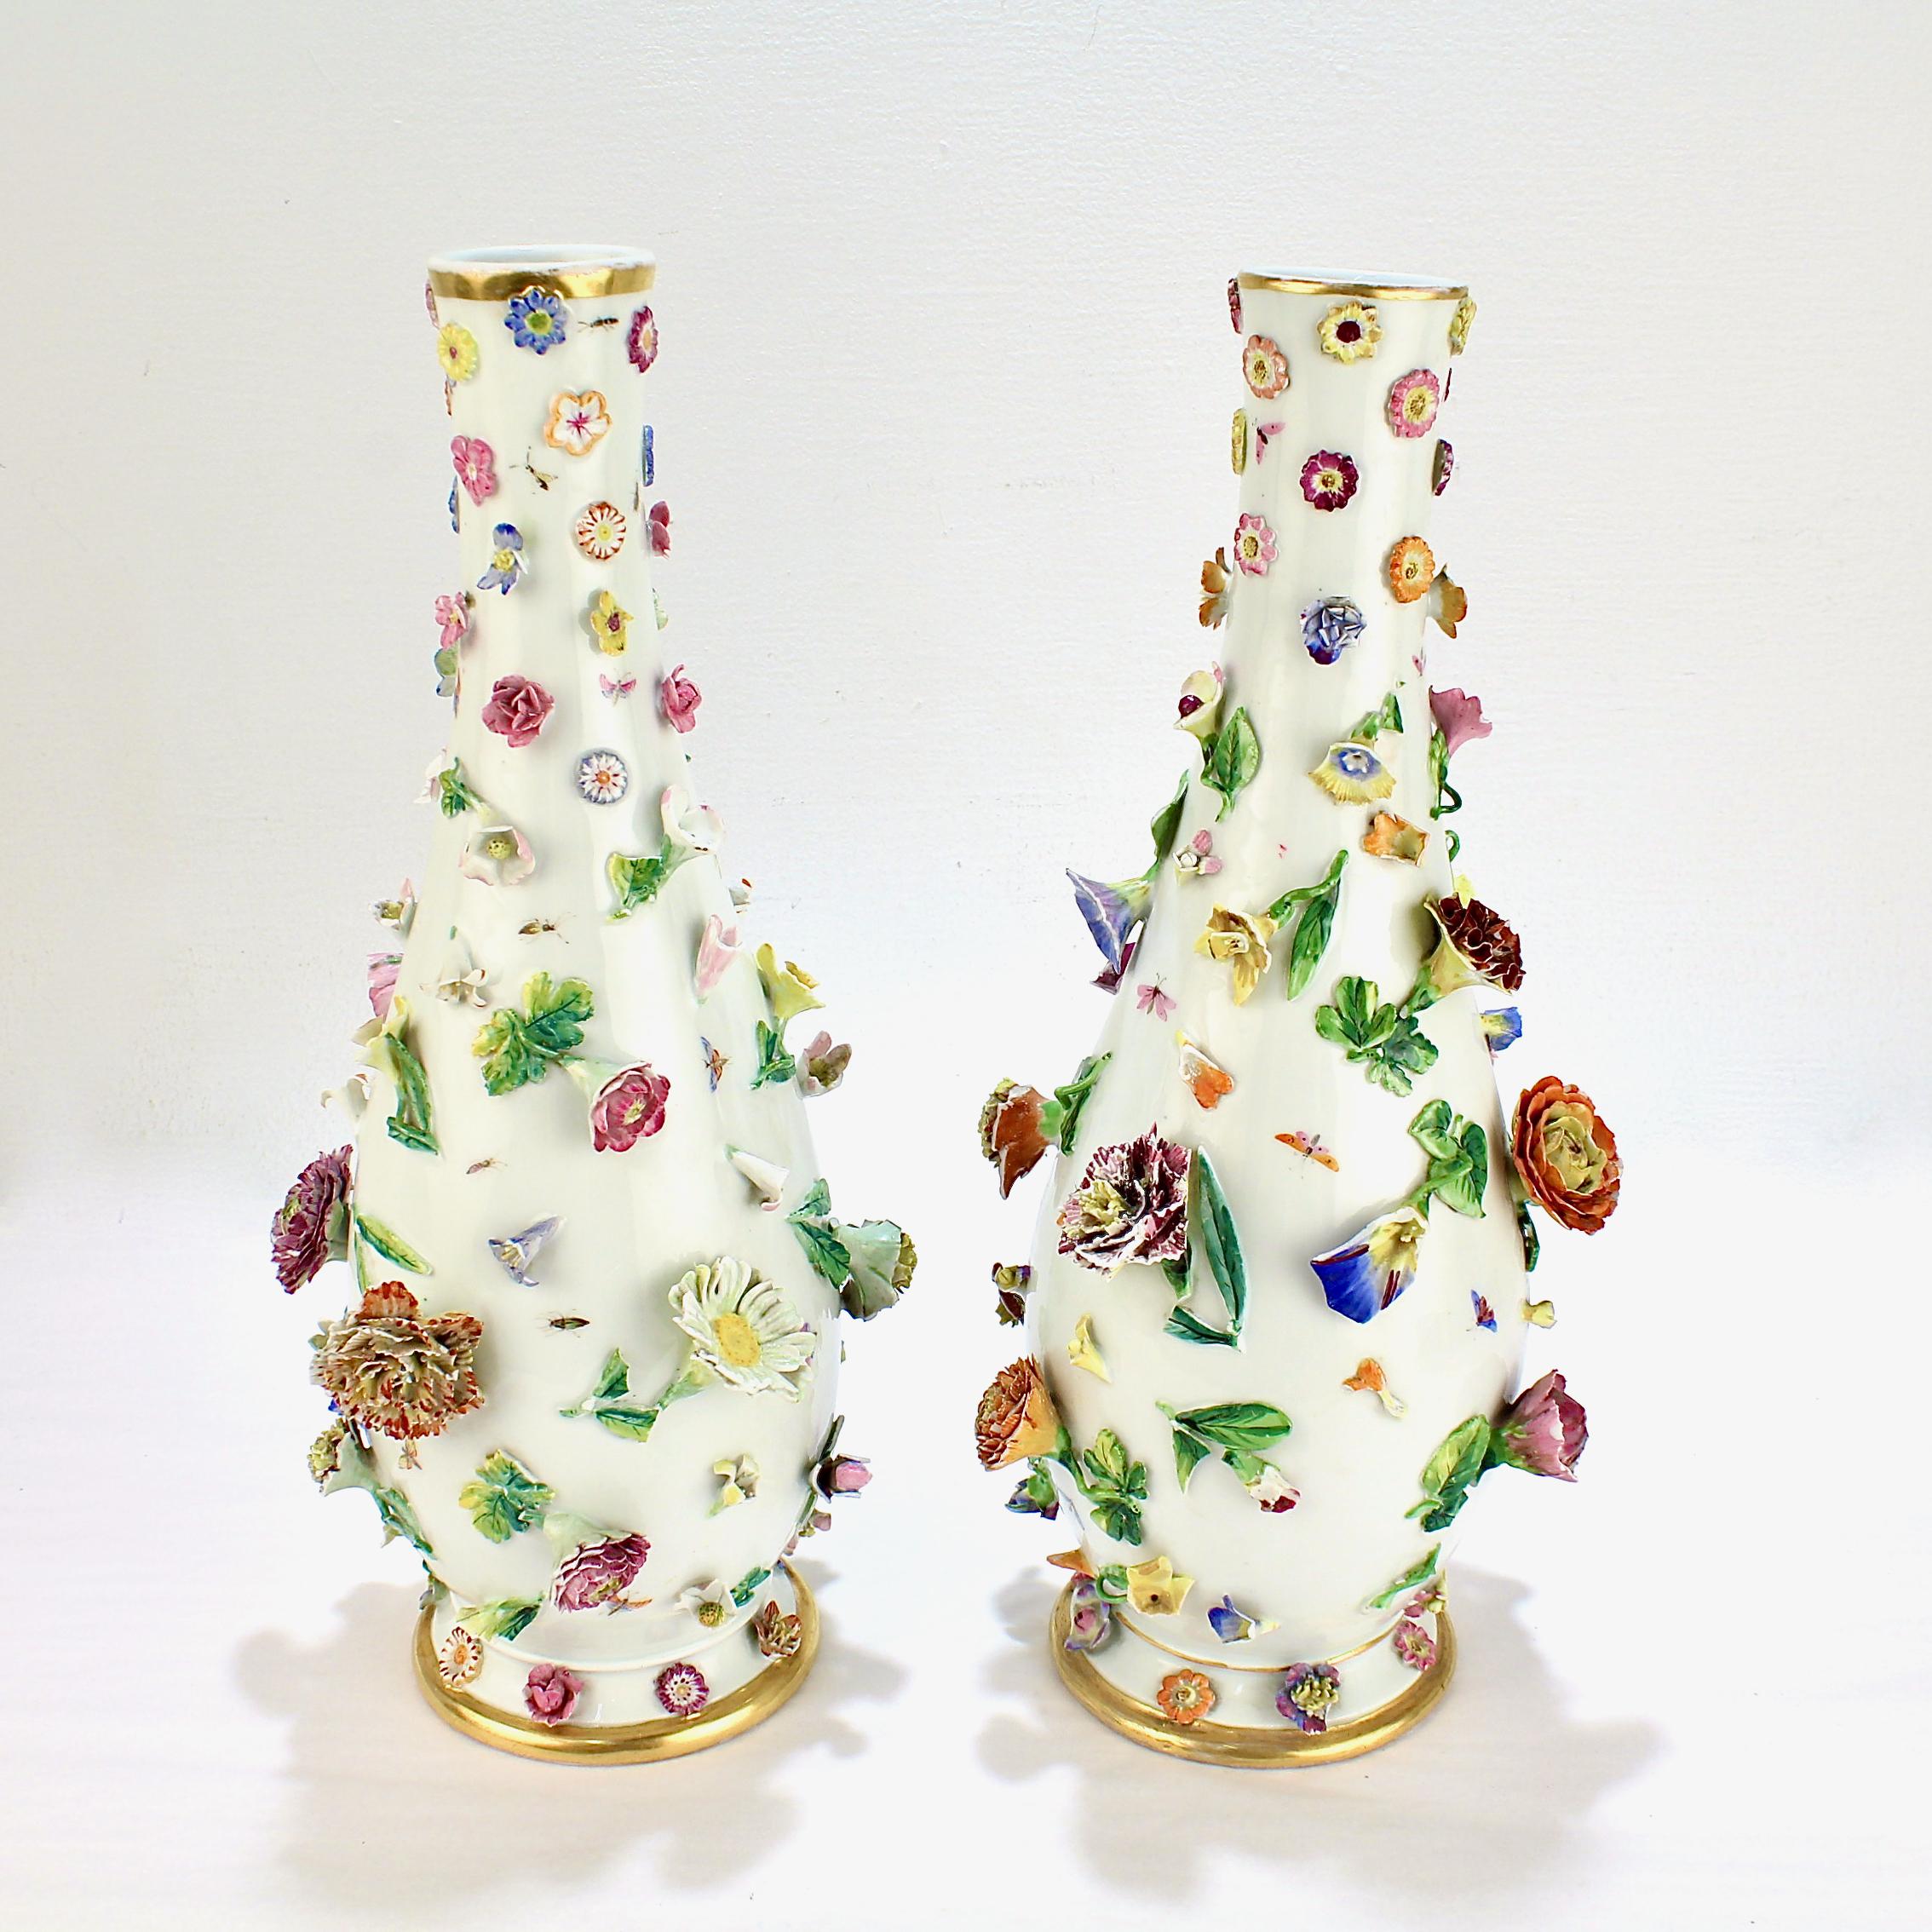 A fine pair of large antique Meissen porcelain vases.

Each encrusted throughout with figural porcelain flowers. Hand Painted insects & butterflies can be found between the foliage throughout. 

Both the base and rim of each vase have gilt